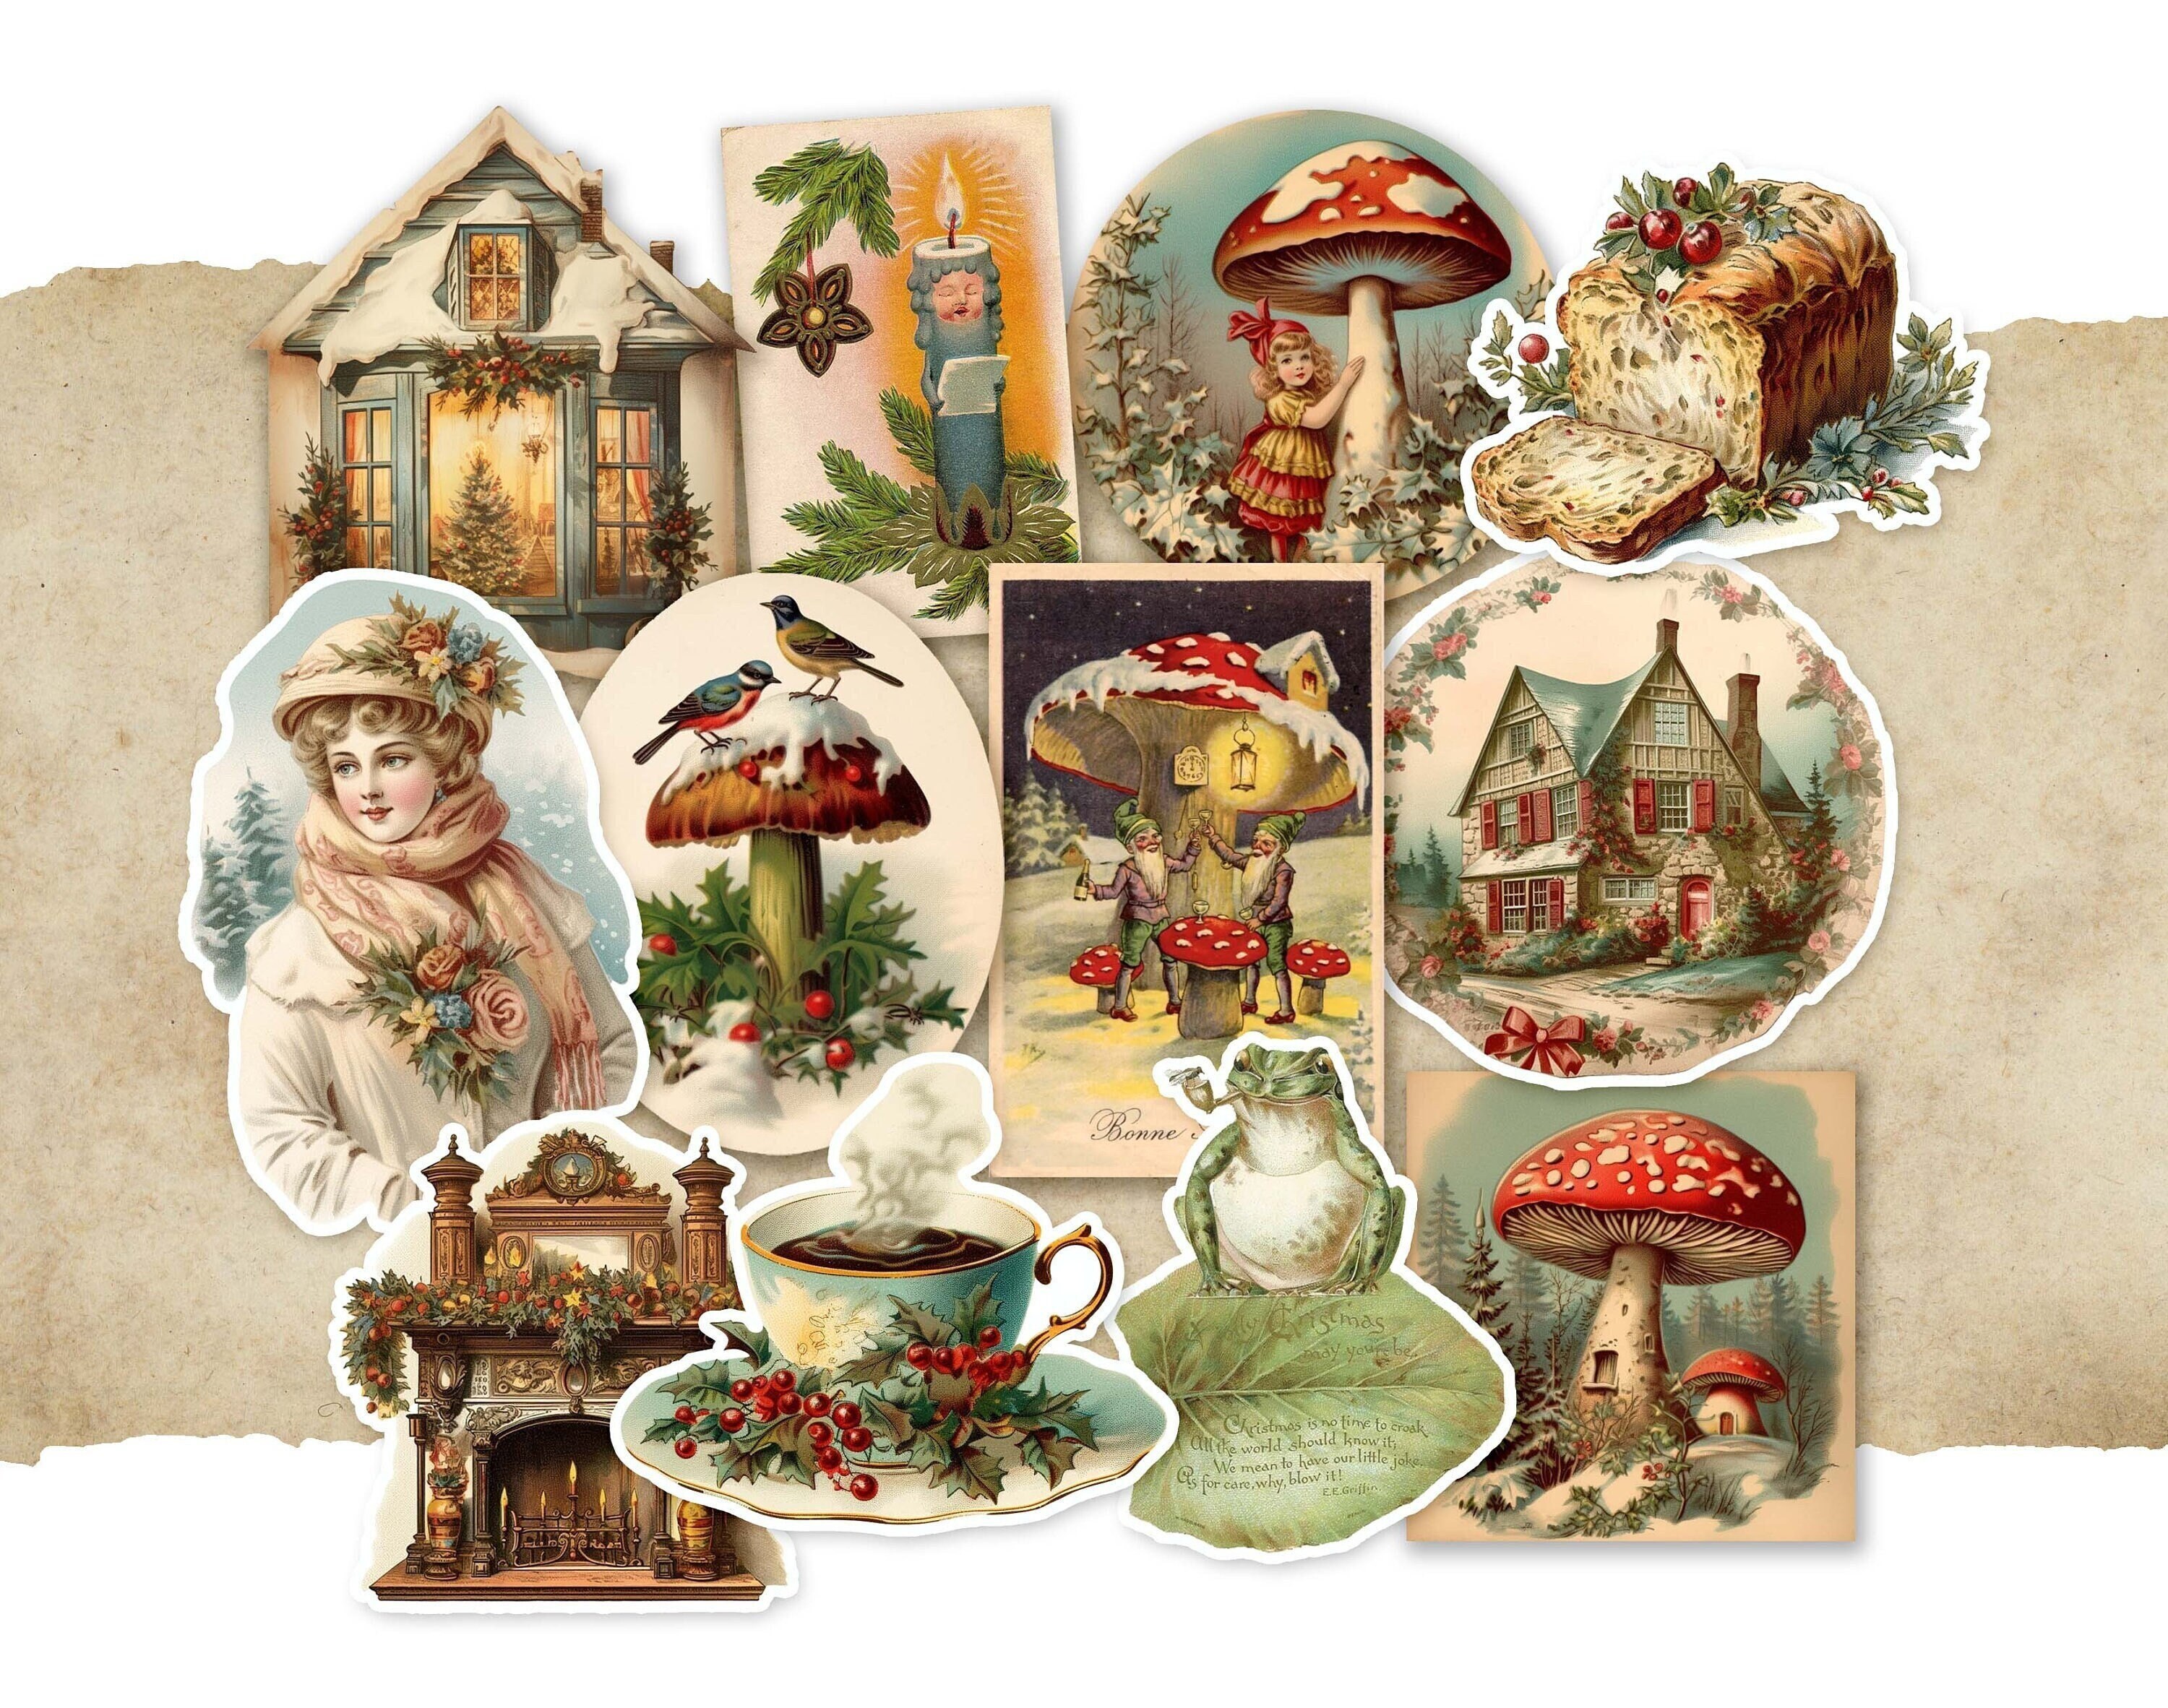 Medieval Magic Witch Sticker Pack Witchy Stickers Vintage Stickers  Aesthetic Stickers Junk Journal Fantasy Stickers -  Norway